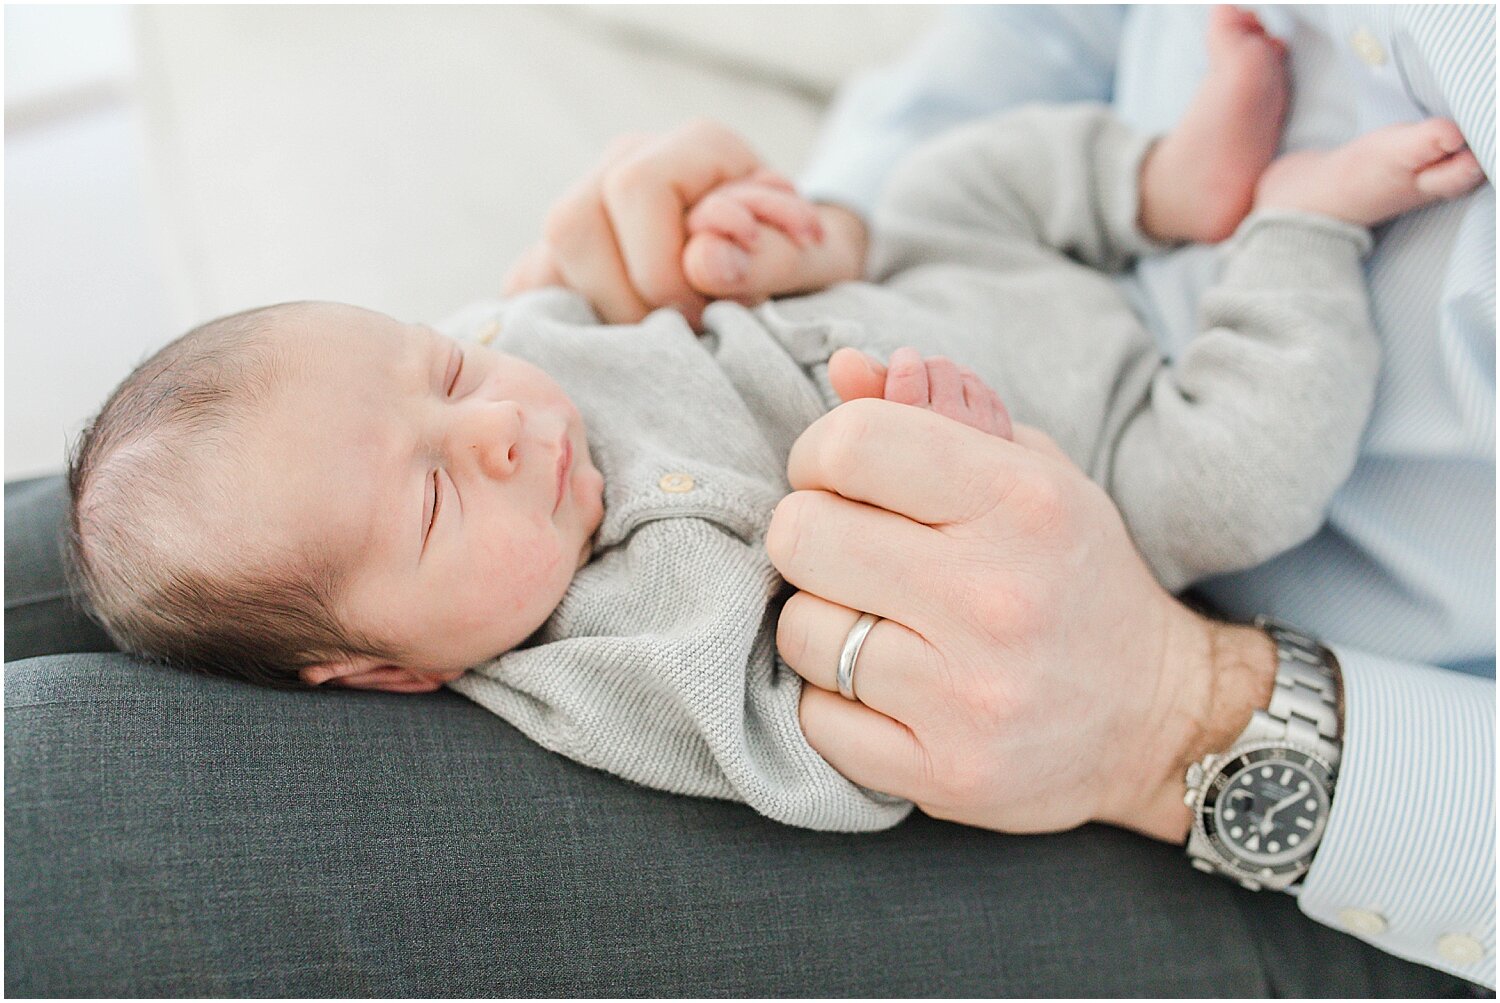 Father and son lifestyle newborn photos during newborn photoshoot. Photos by Kristin Wood Photography.